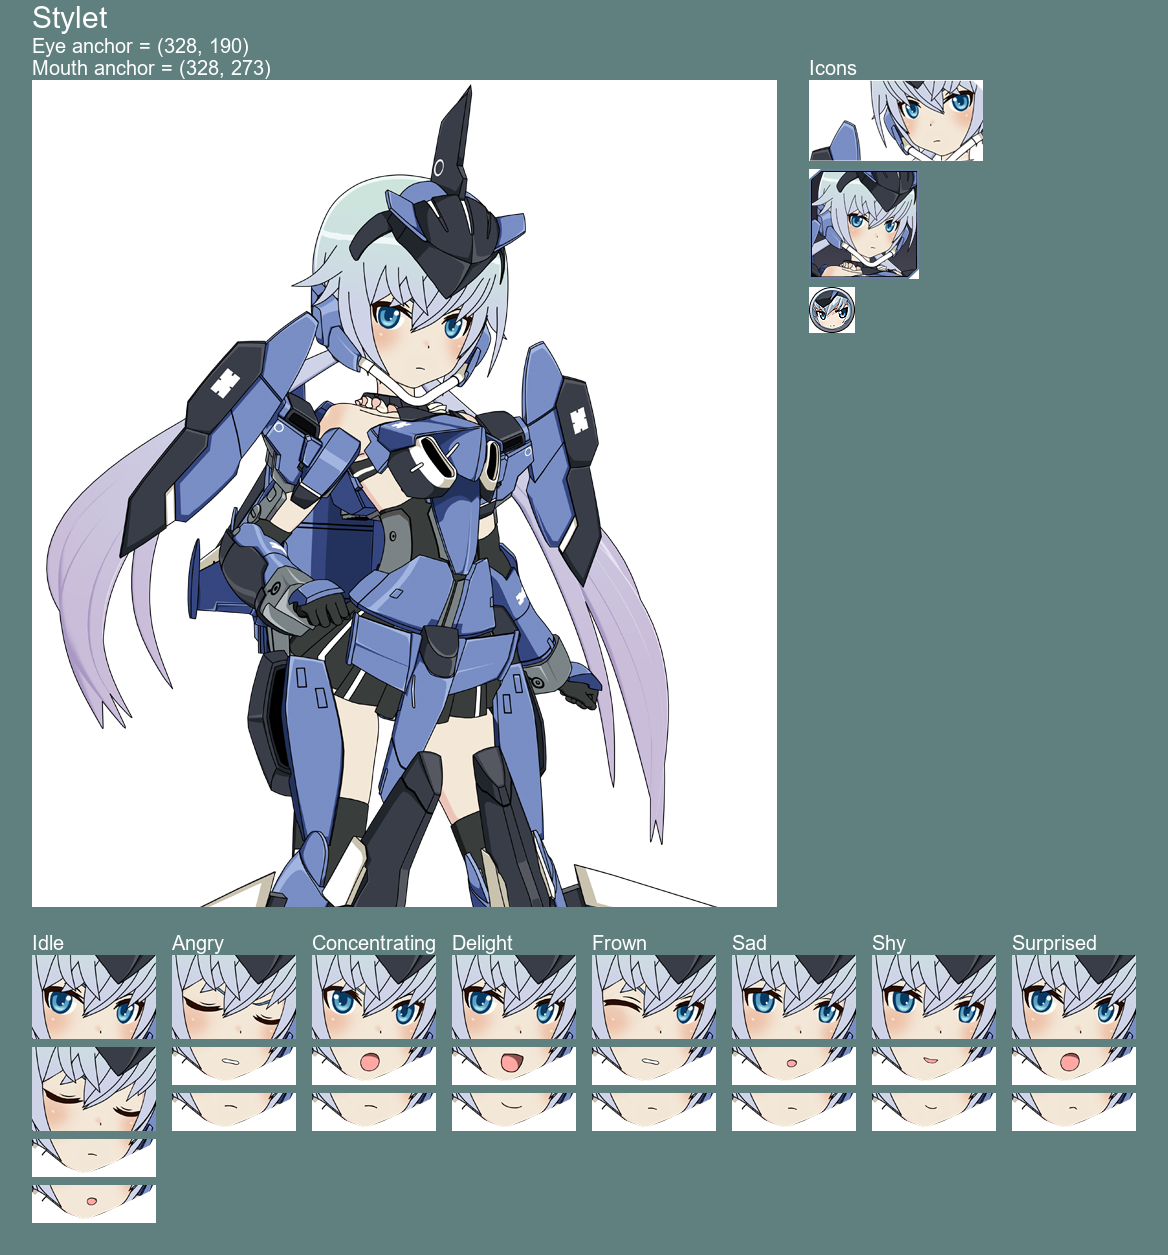 Stylet (Frame Arms Girl)